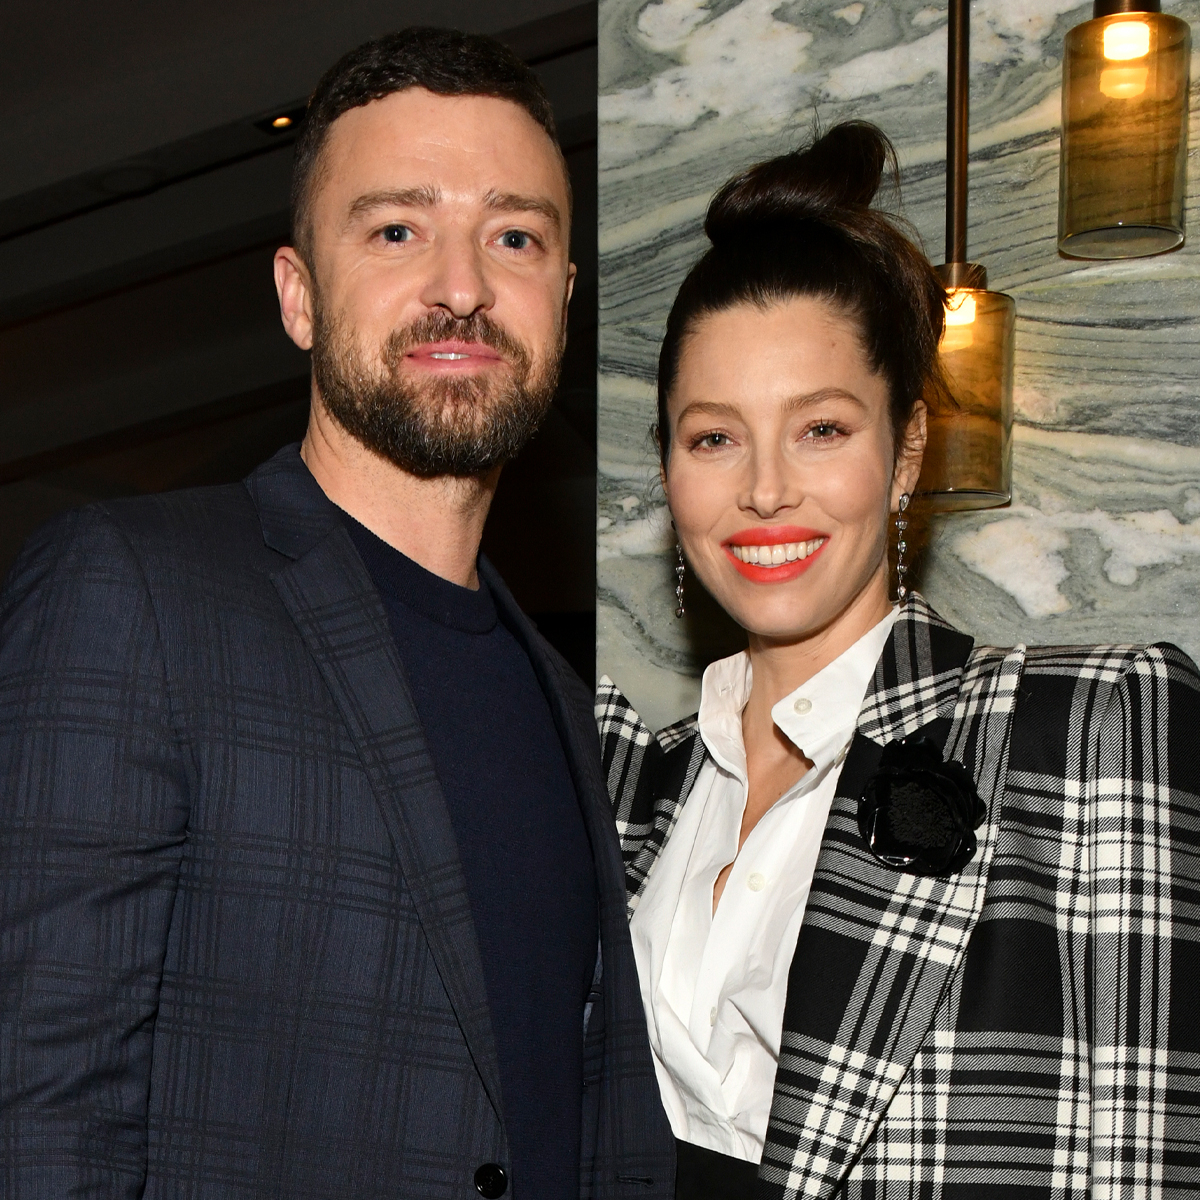 Jessica Biel rocks feathers for date with Justin Timberlake